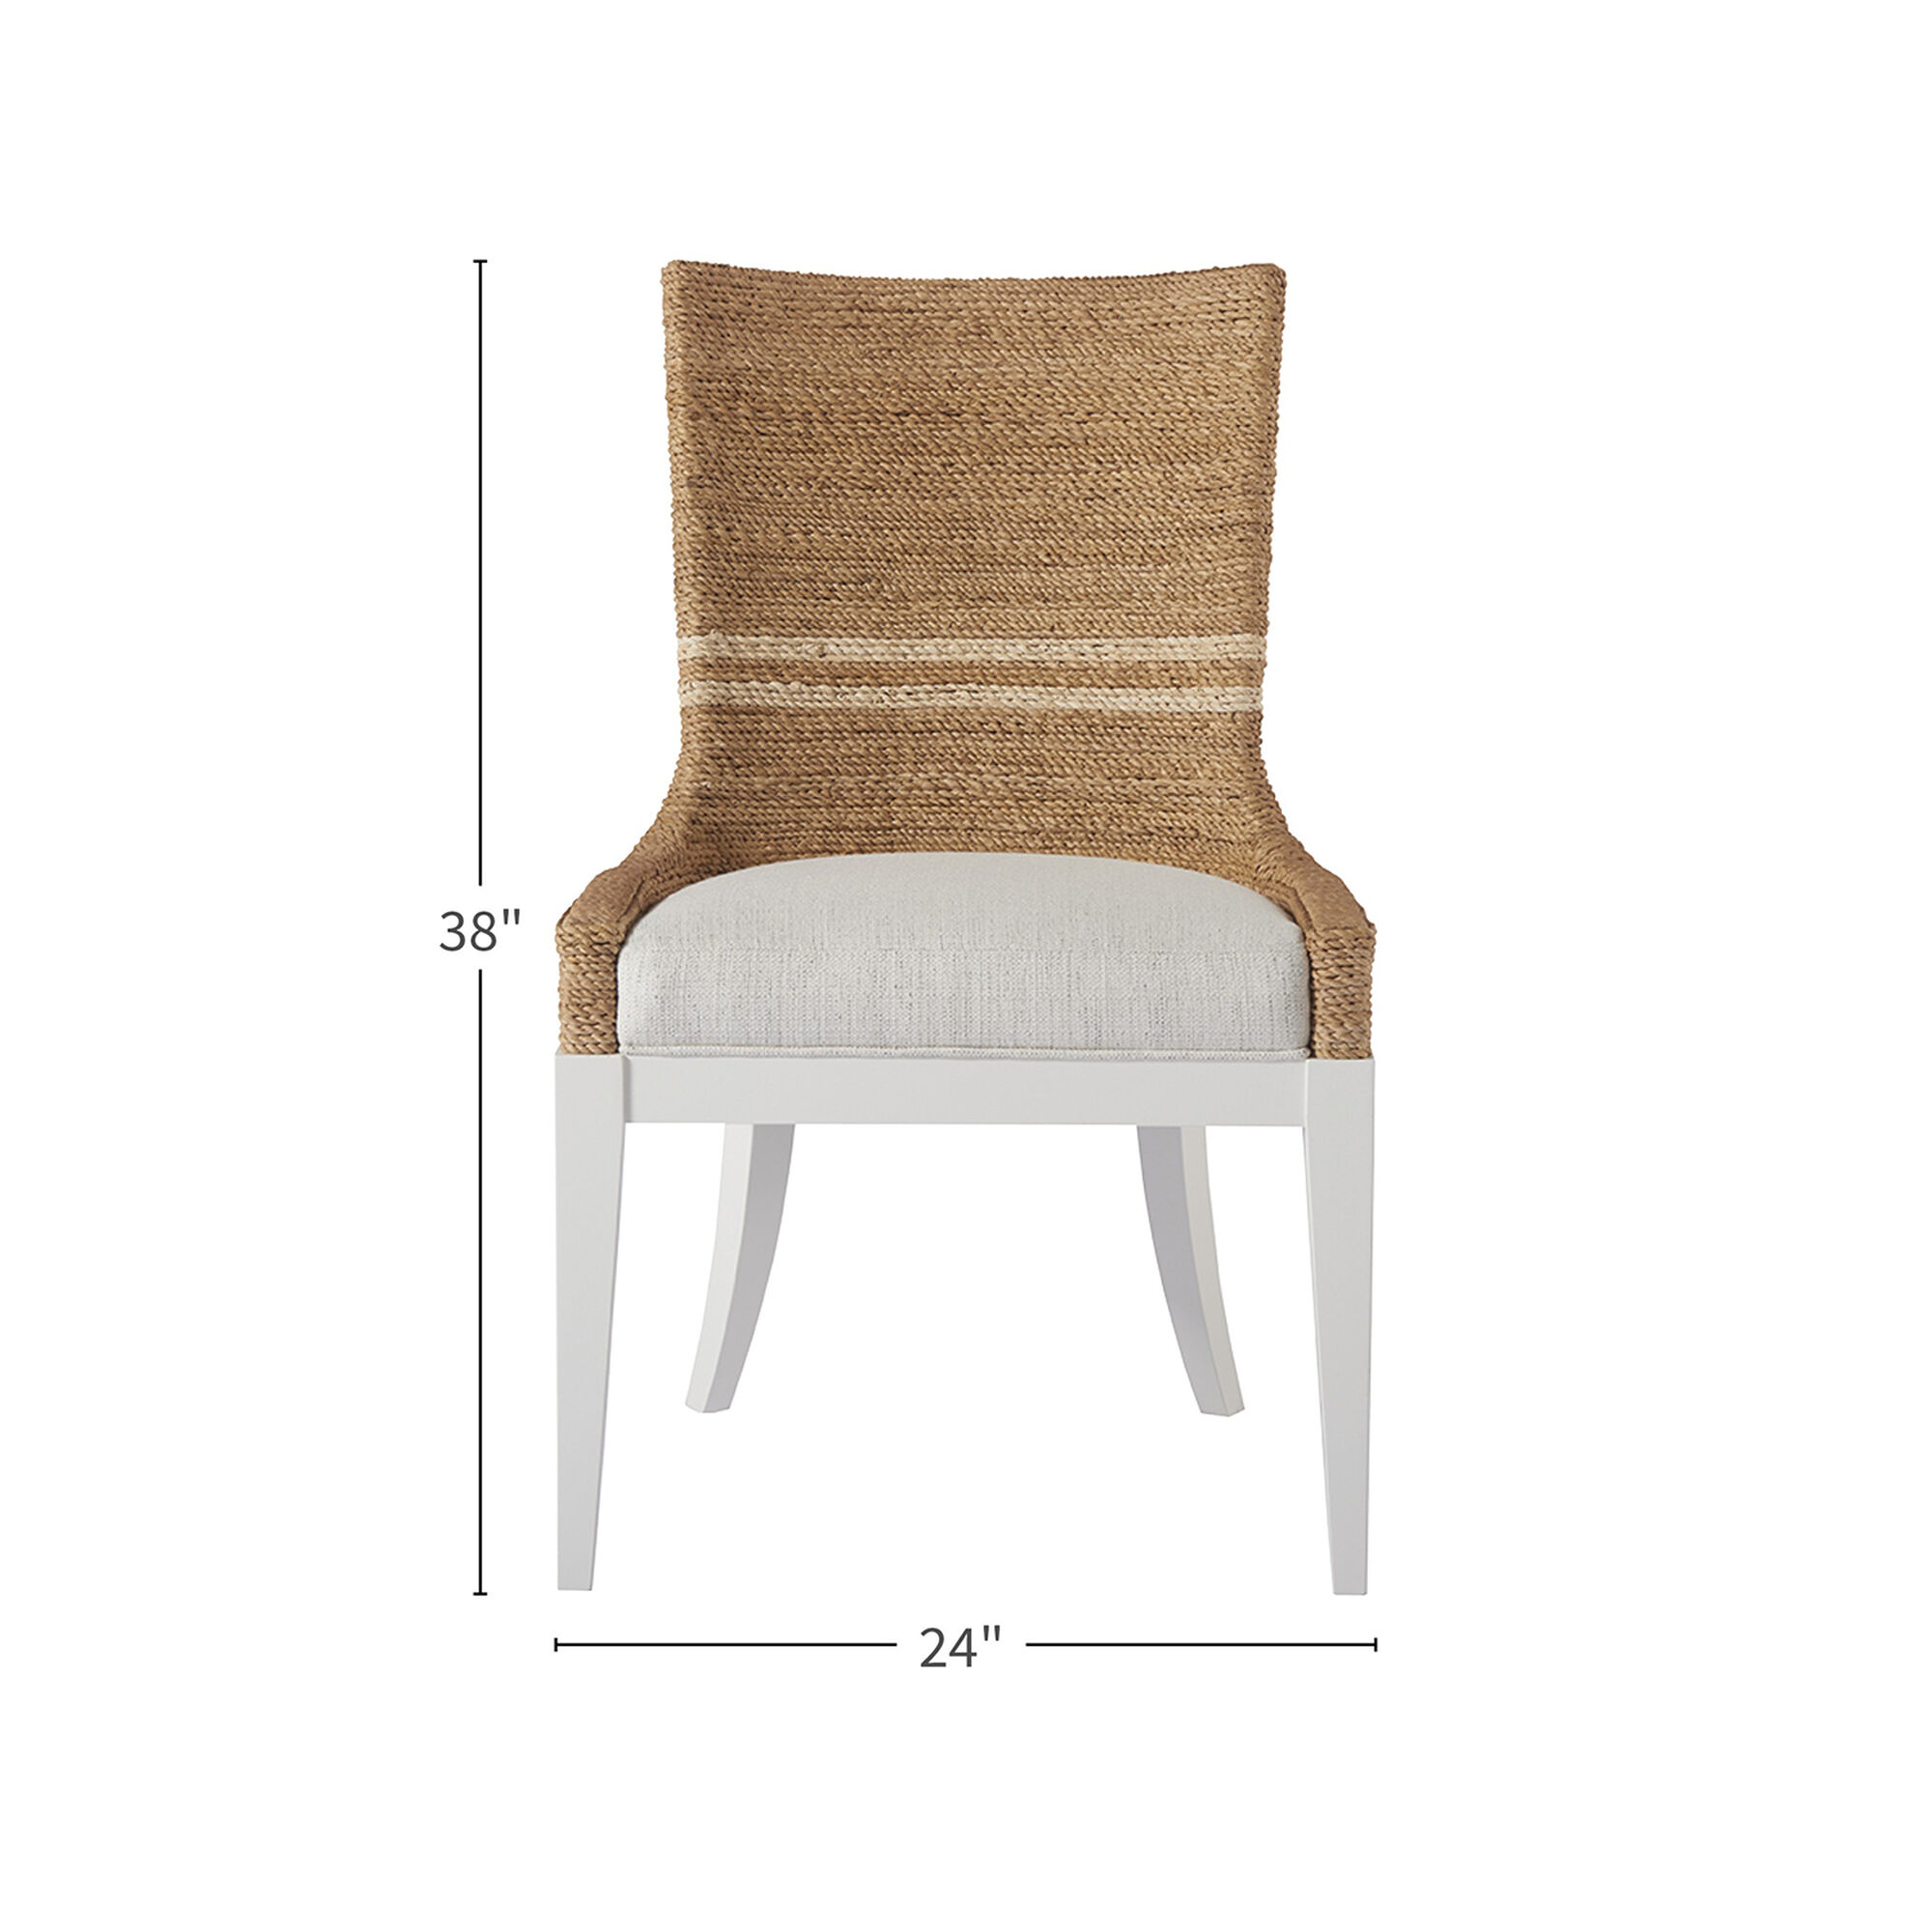 Escape Sailcloth Siesta Key Dining Chair- Set of 2